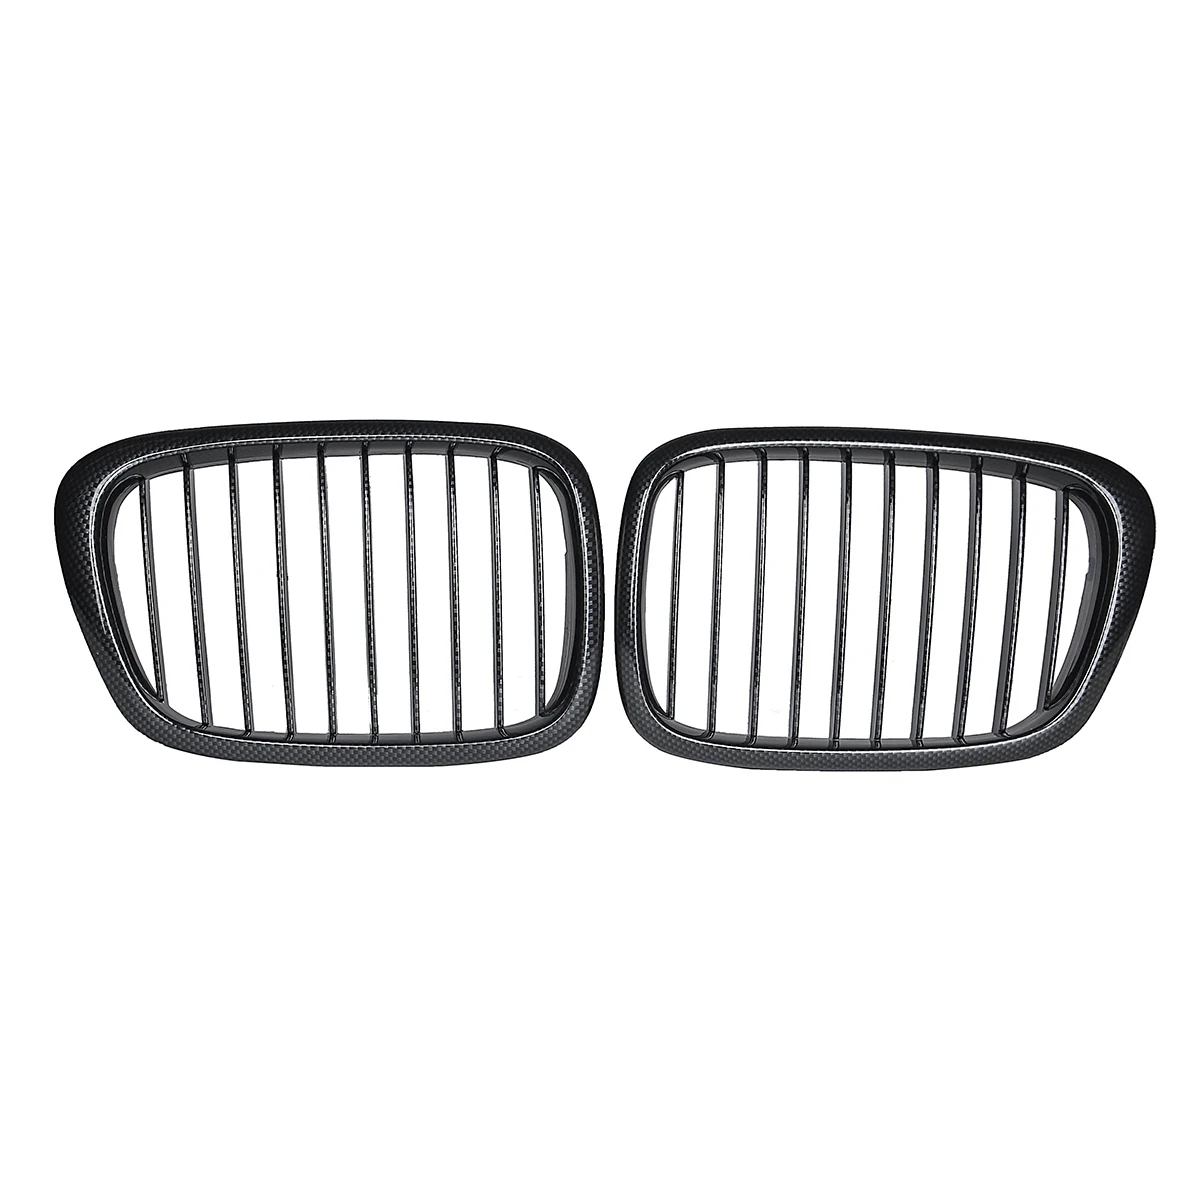 

1 Pair Gloss Carbon Fiber ABS Car Front Kidney Grilles Grill Hood for-BMW E39 5 Series 525 528 530 535 540 M5 1997-2003